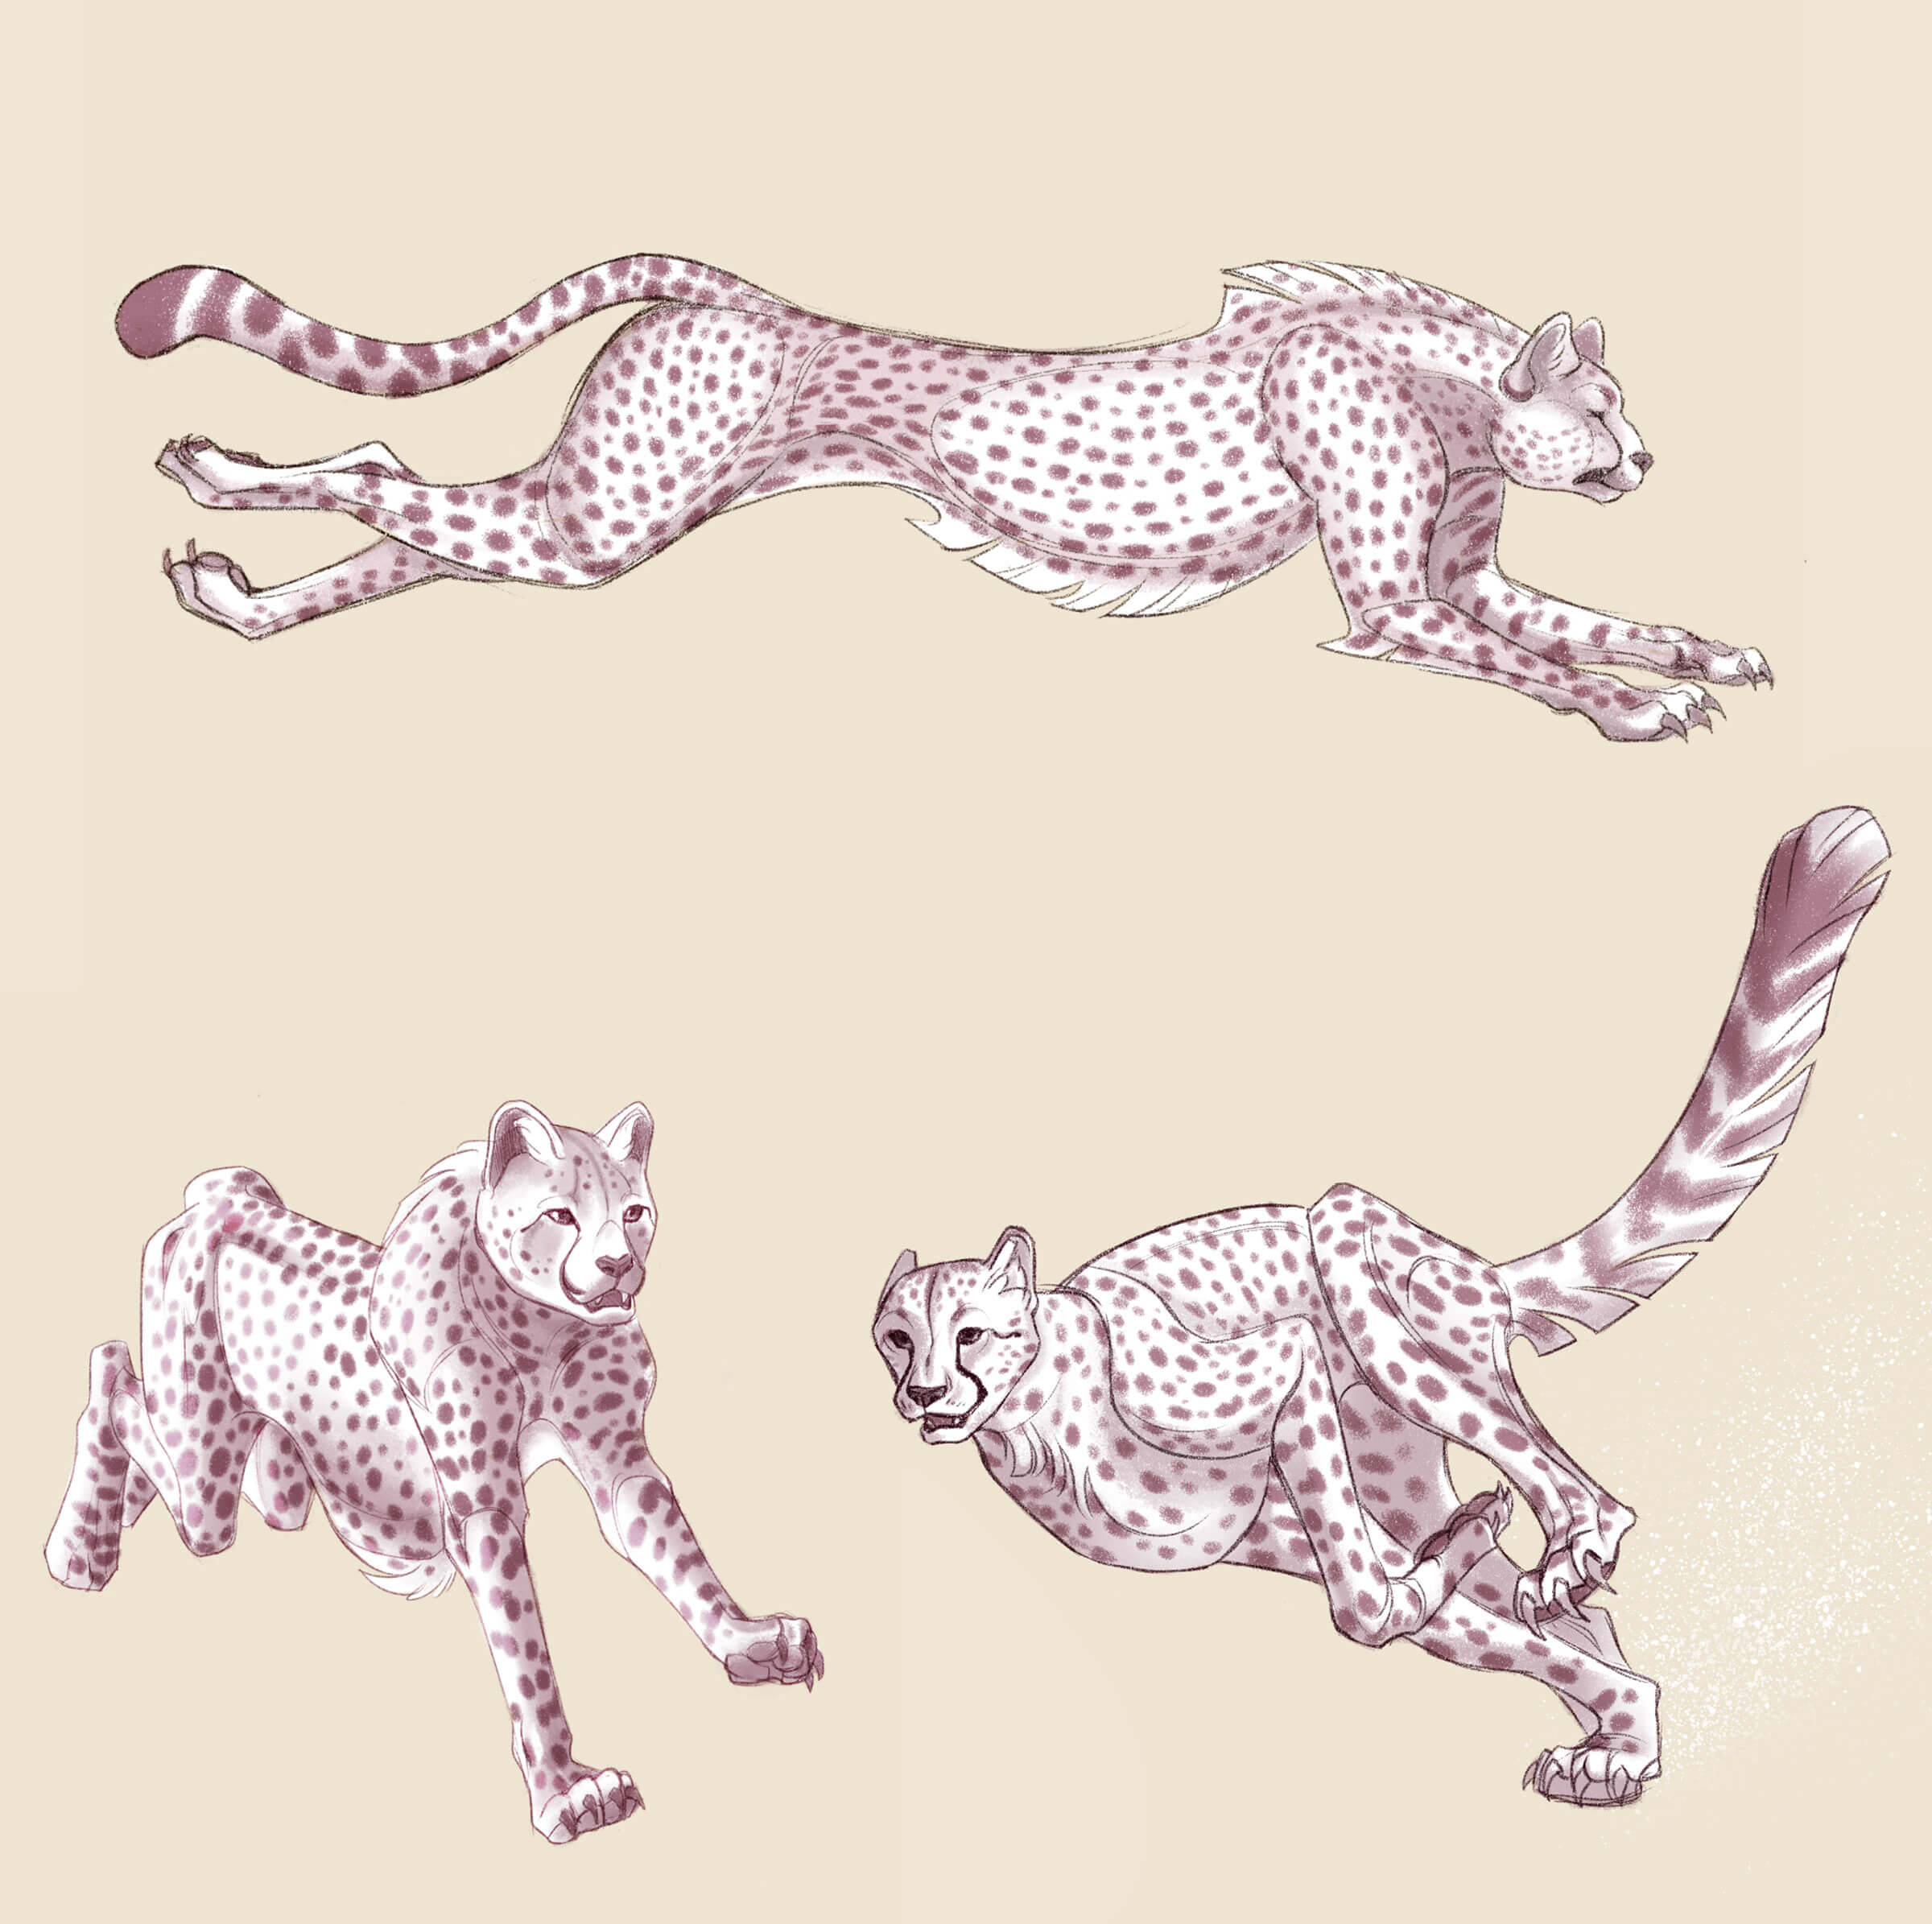 Three different angles of a sepia-toned, cheetah-like quadruped in mid-sprint.